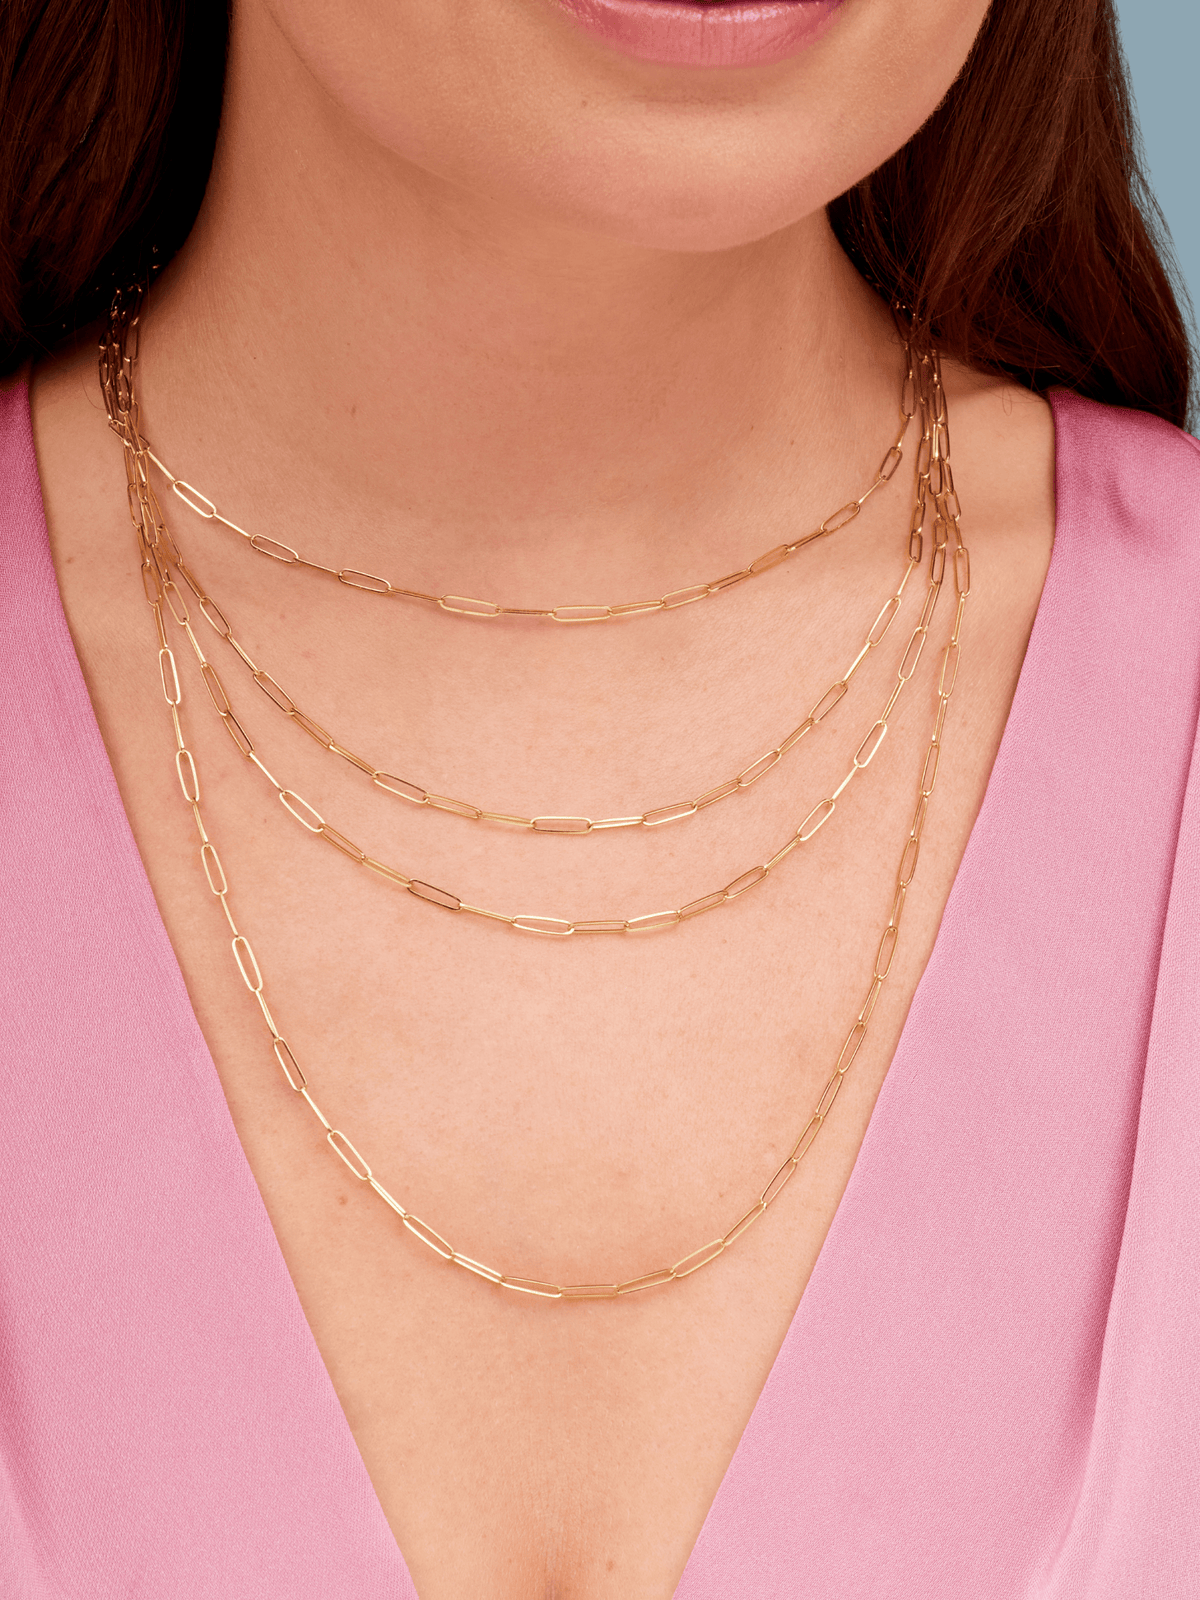 14K gold paperclip chain necklace in different lengths